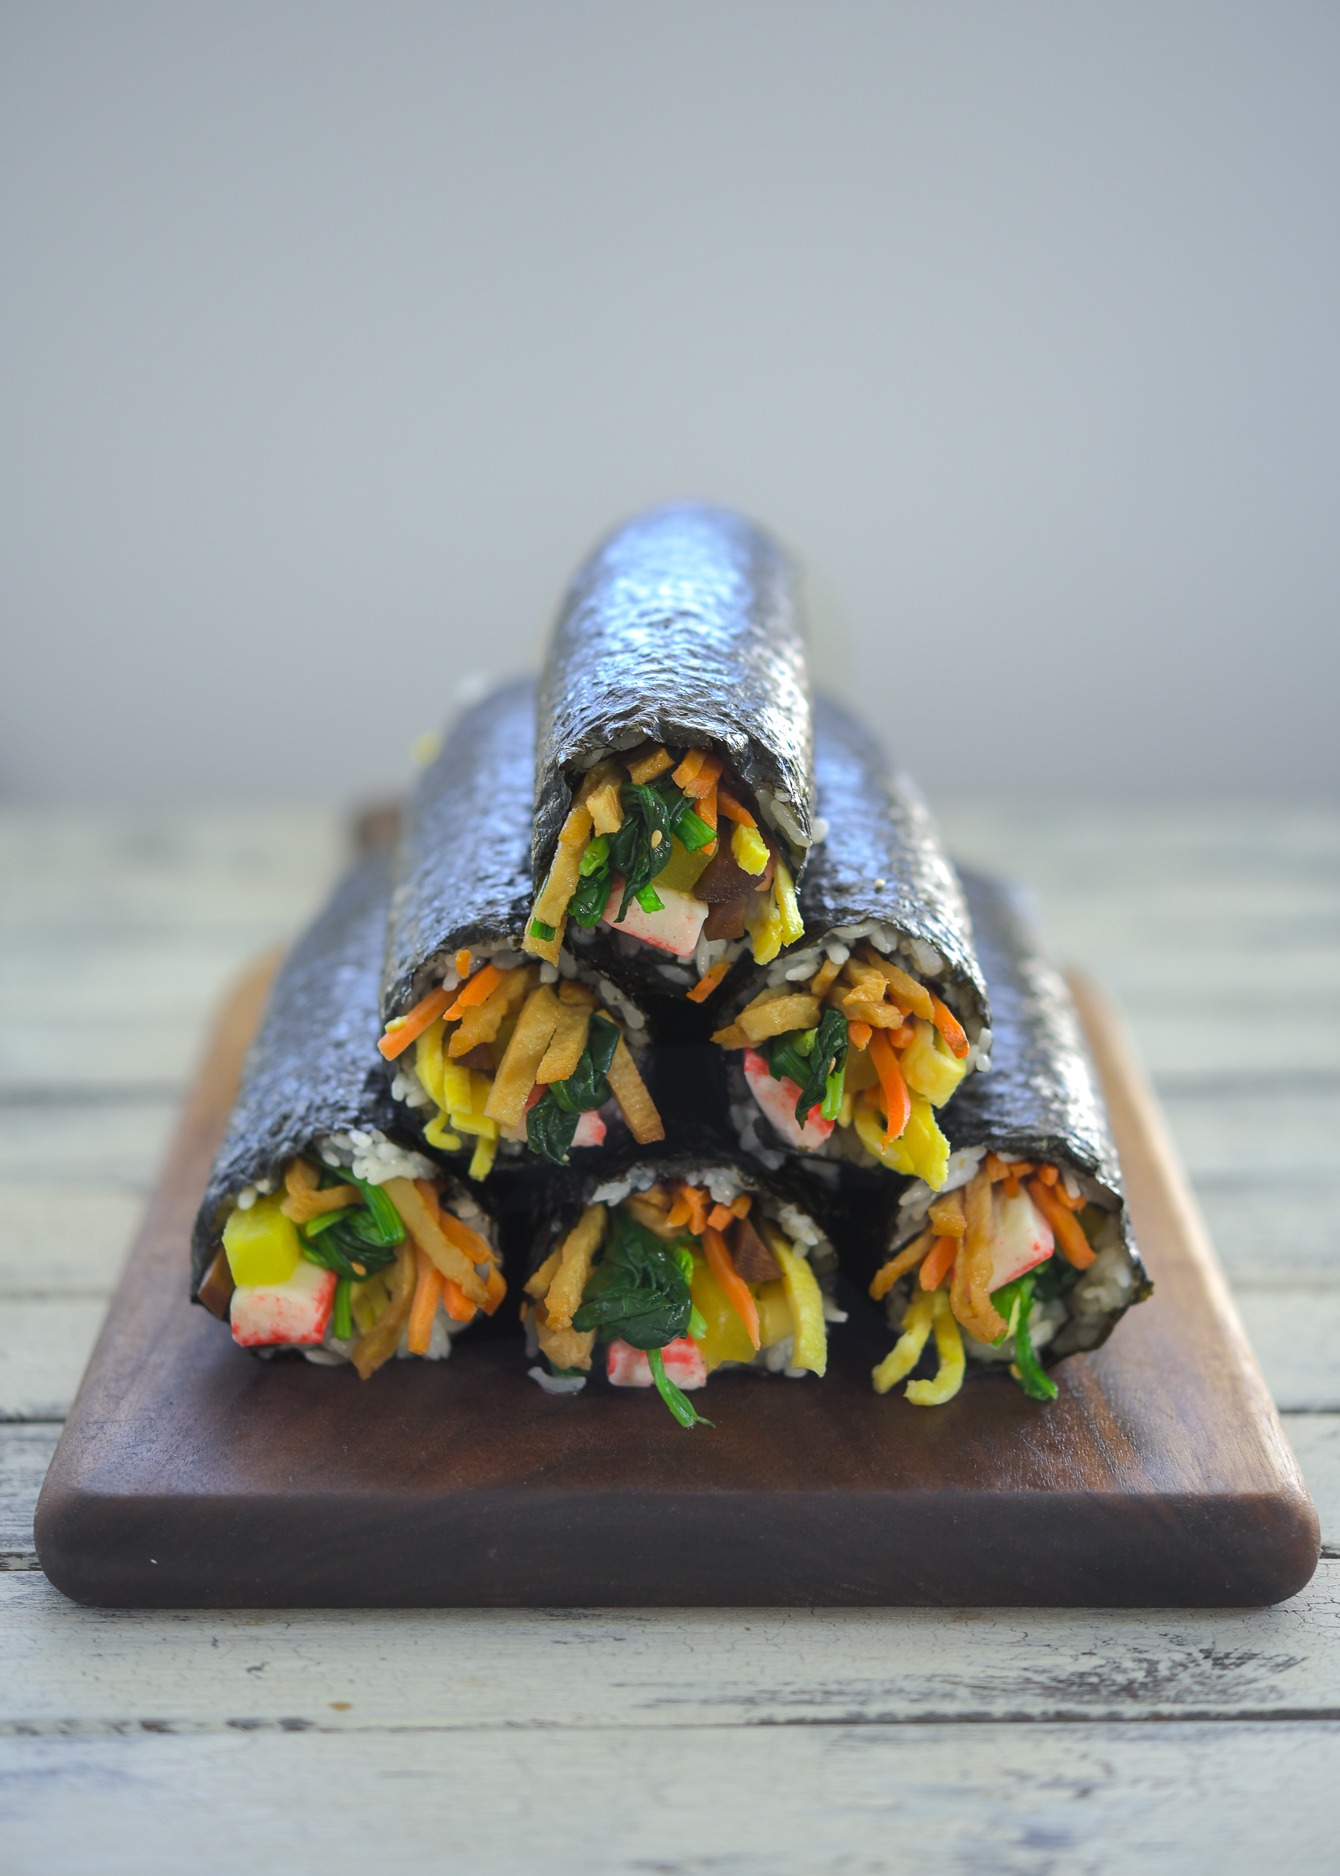 Kimbap (Korean seaweed rice rolls) stacked together on a wooden board.